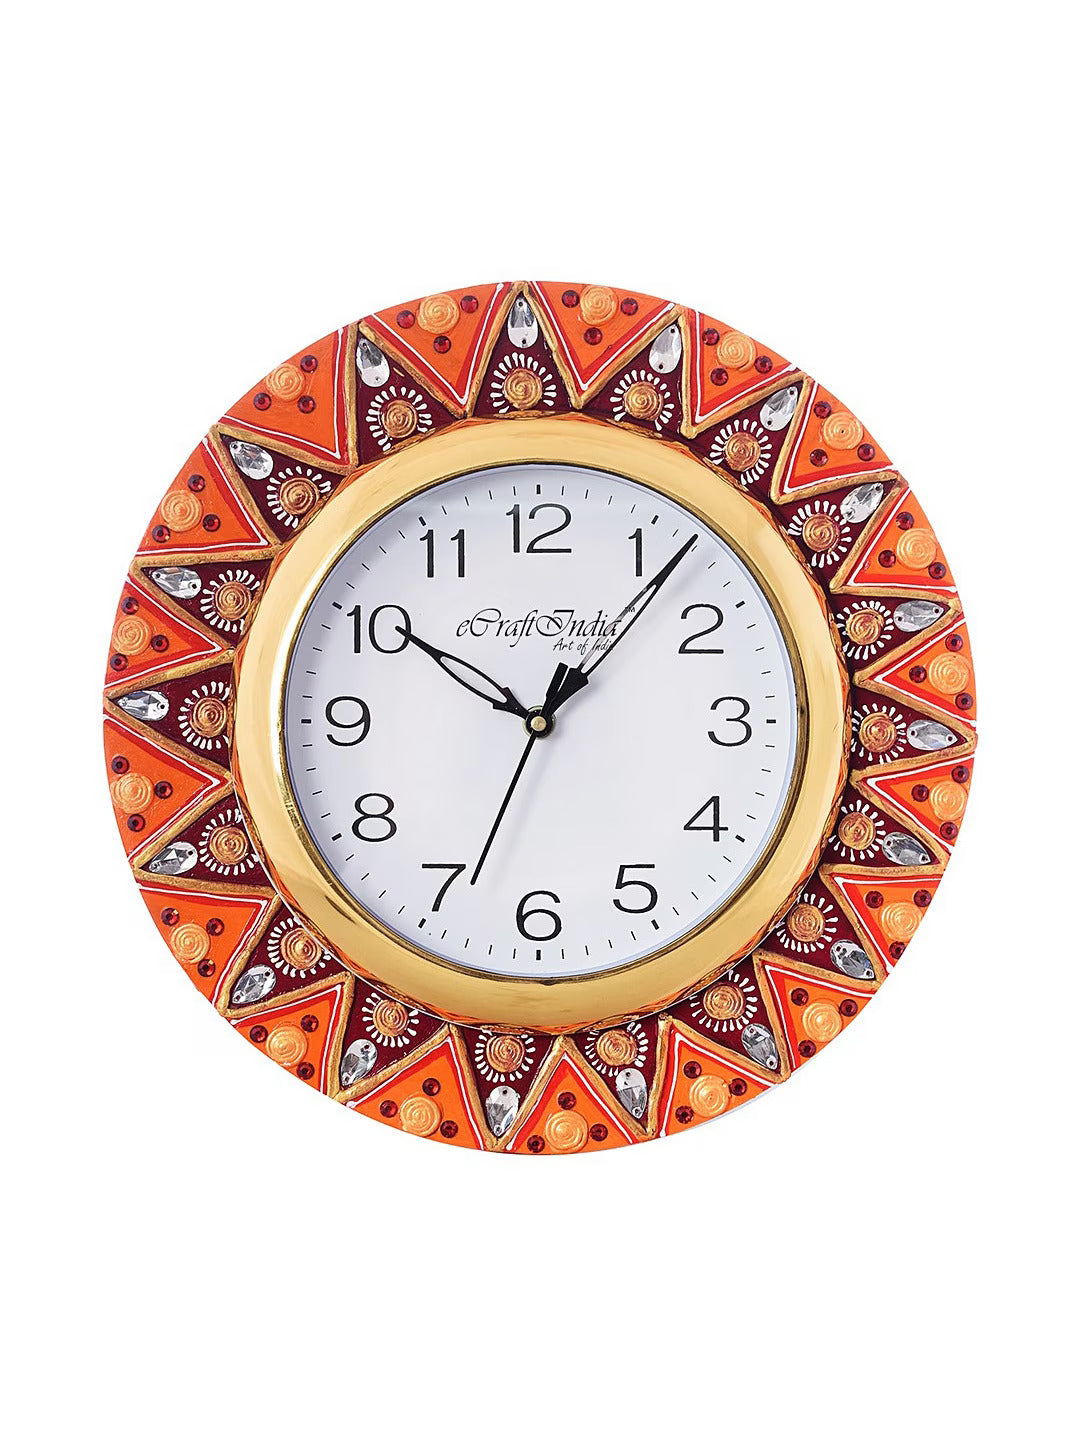 White Dial Stone-Studded 30.48 cm Handcrafted Analogue Wall Clock